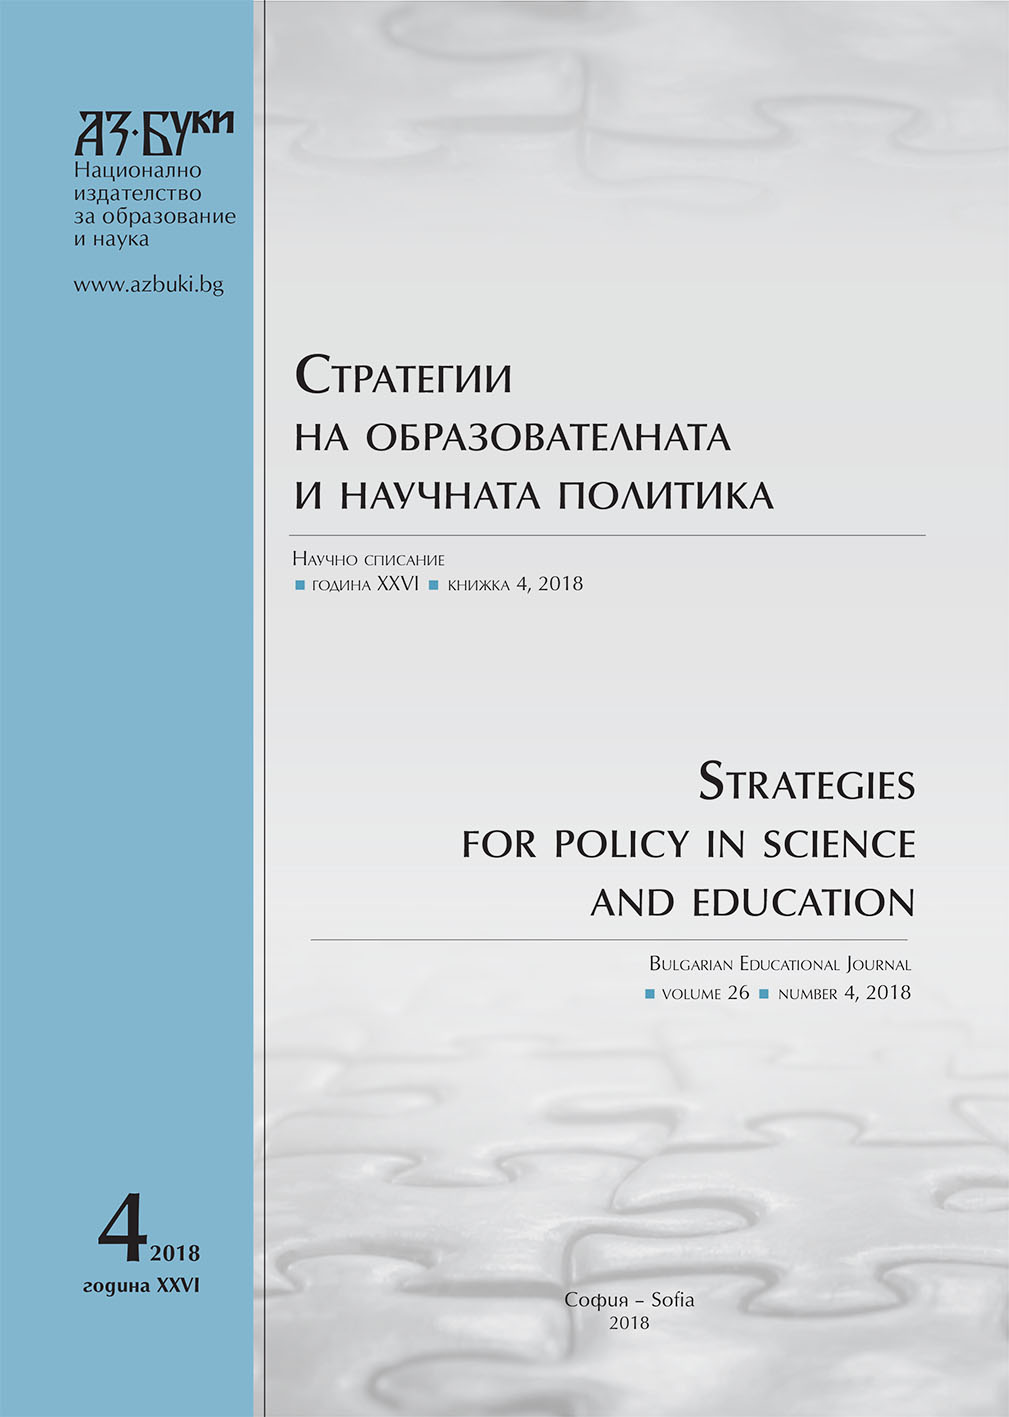 About the Problems of Observation and Assessment of the Research and Artistic Activity Carried out by the Universities and Scientific Organizations in Bulgaria Cover Image